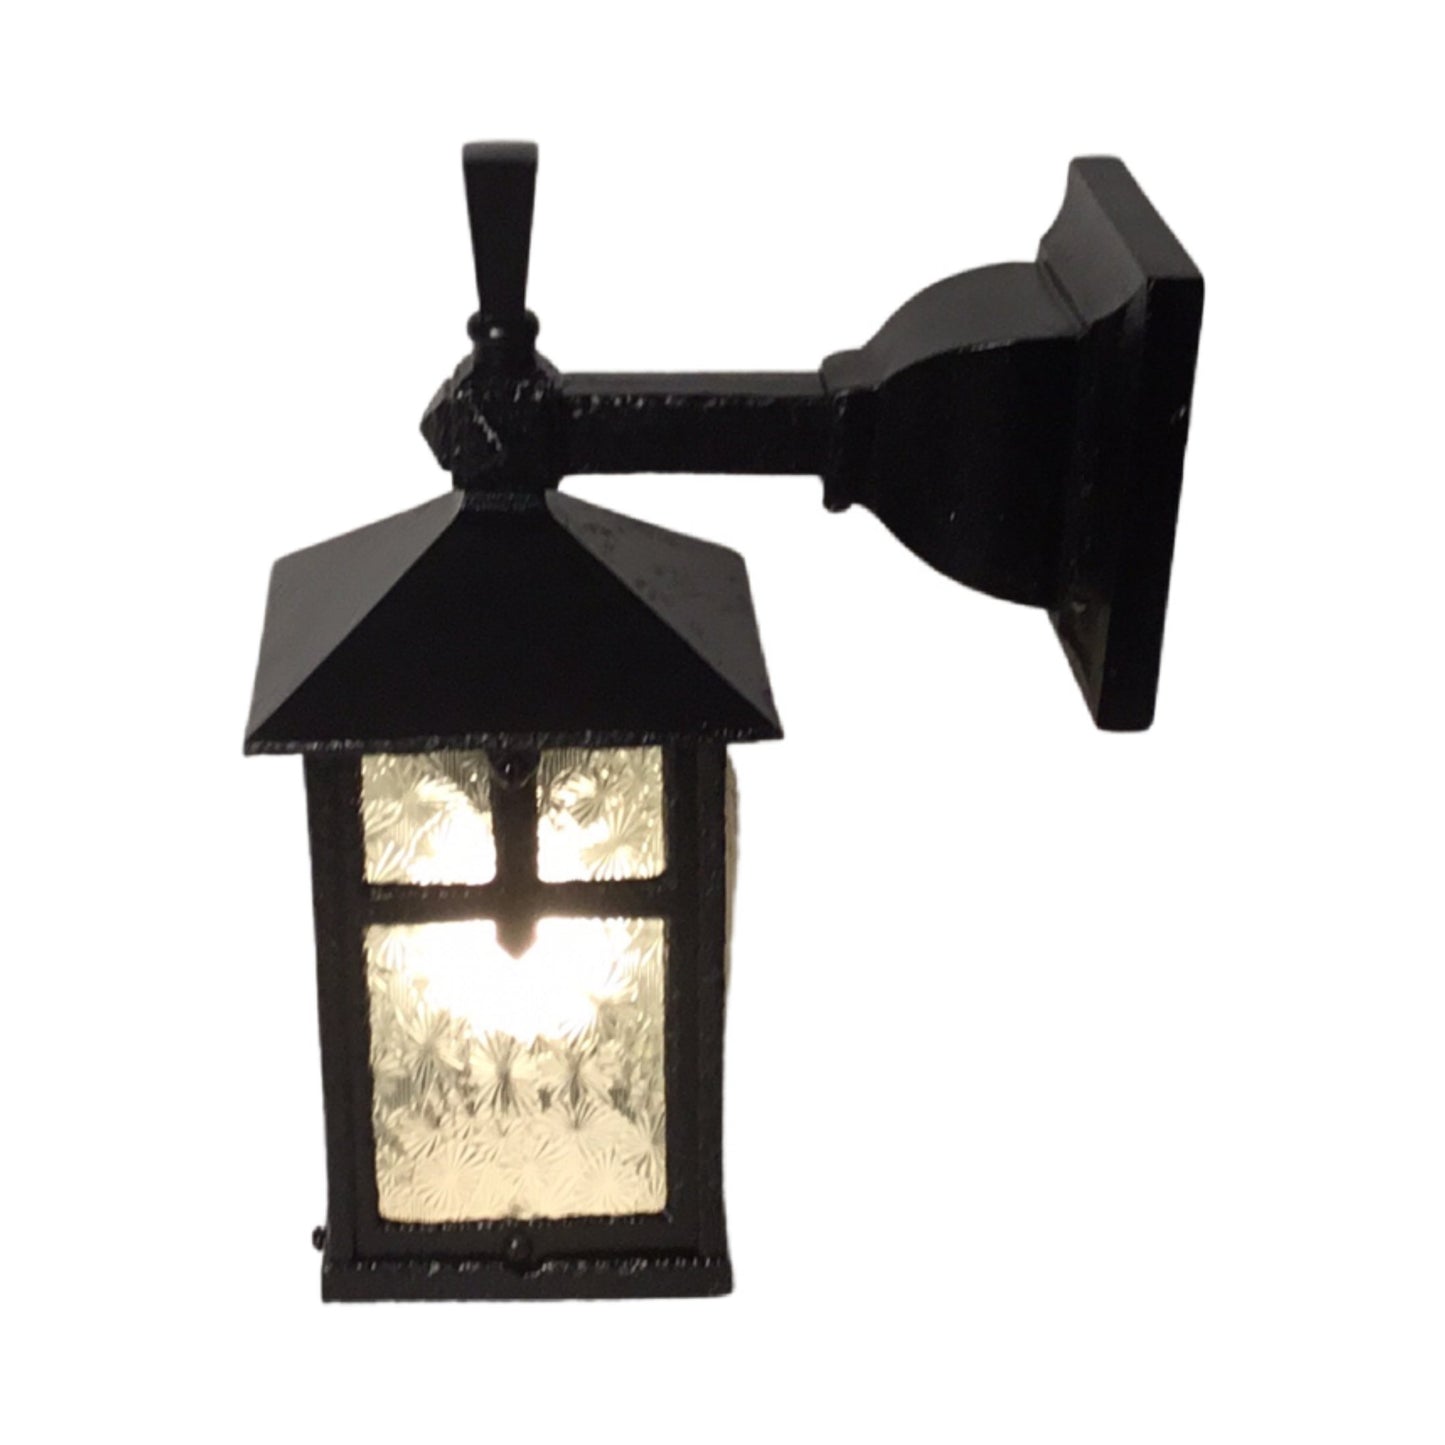 Antique Arts and Crafts Porch Light with Florentine Glass